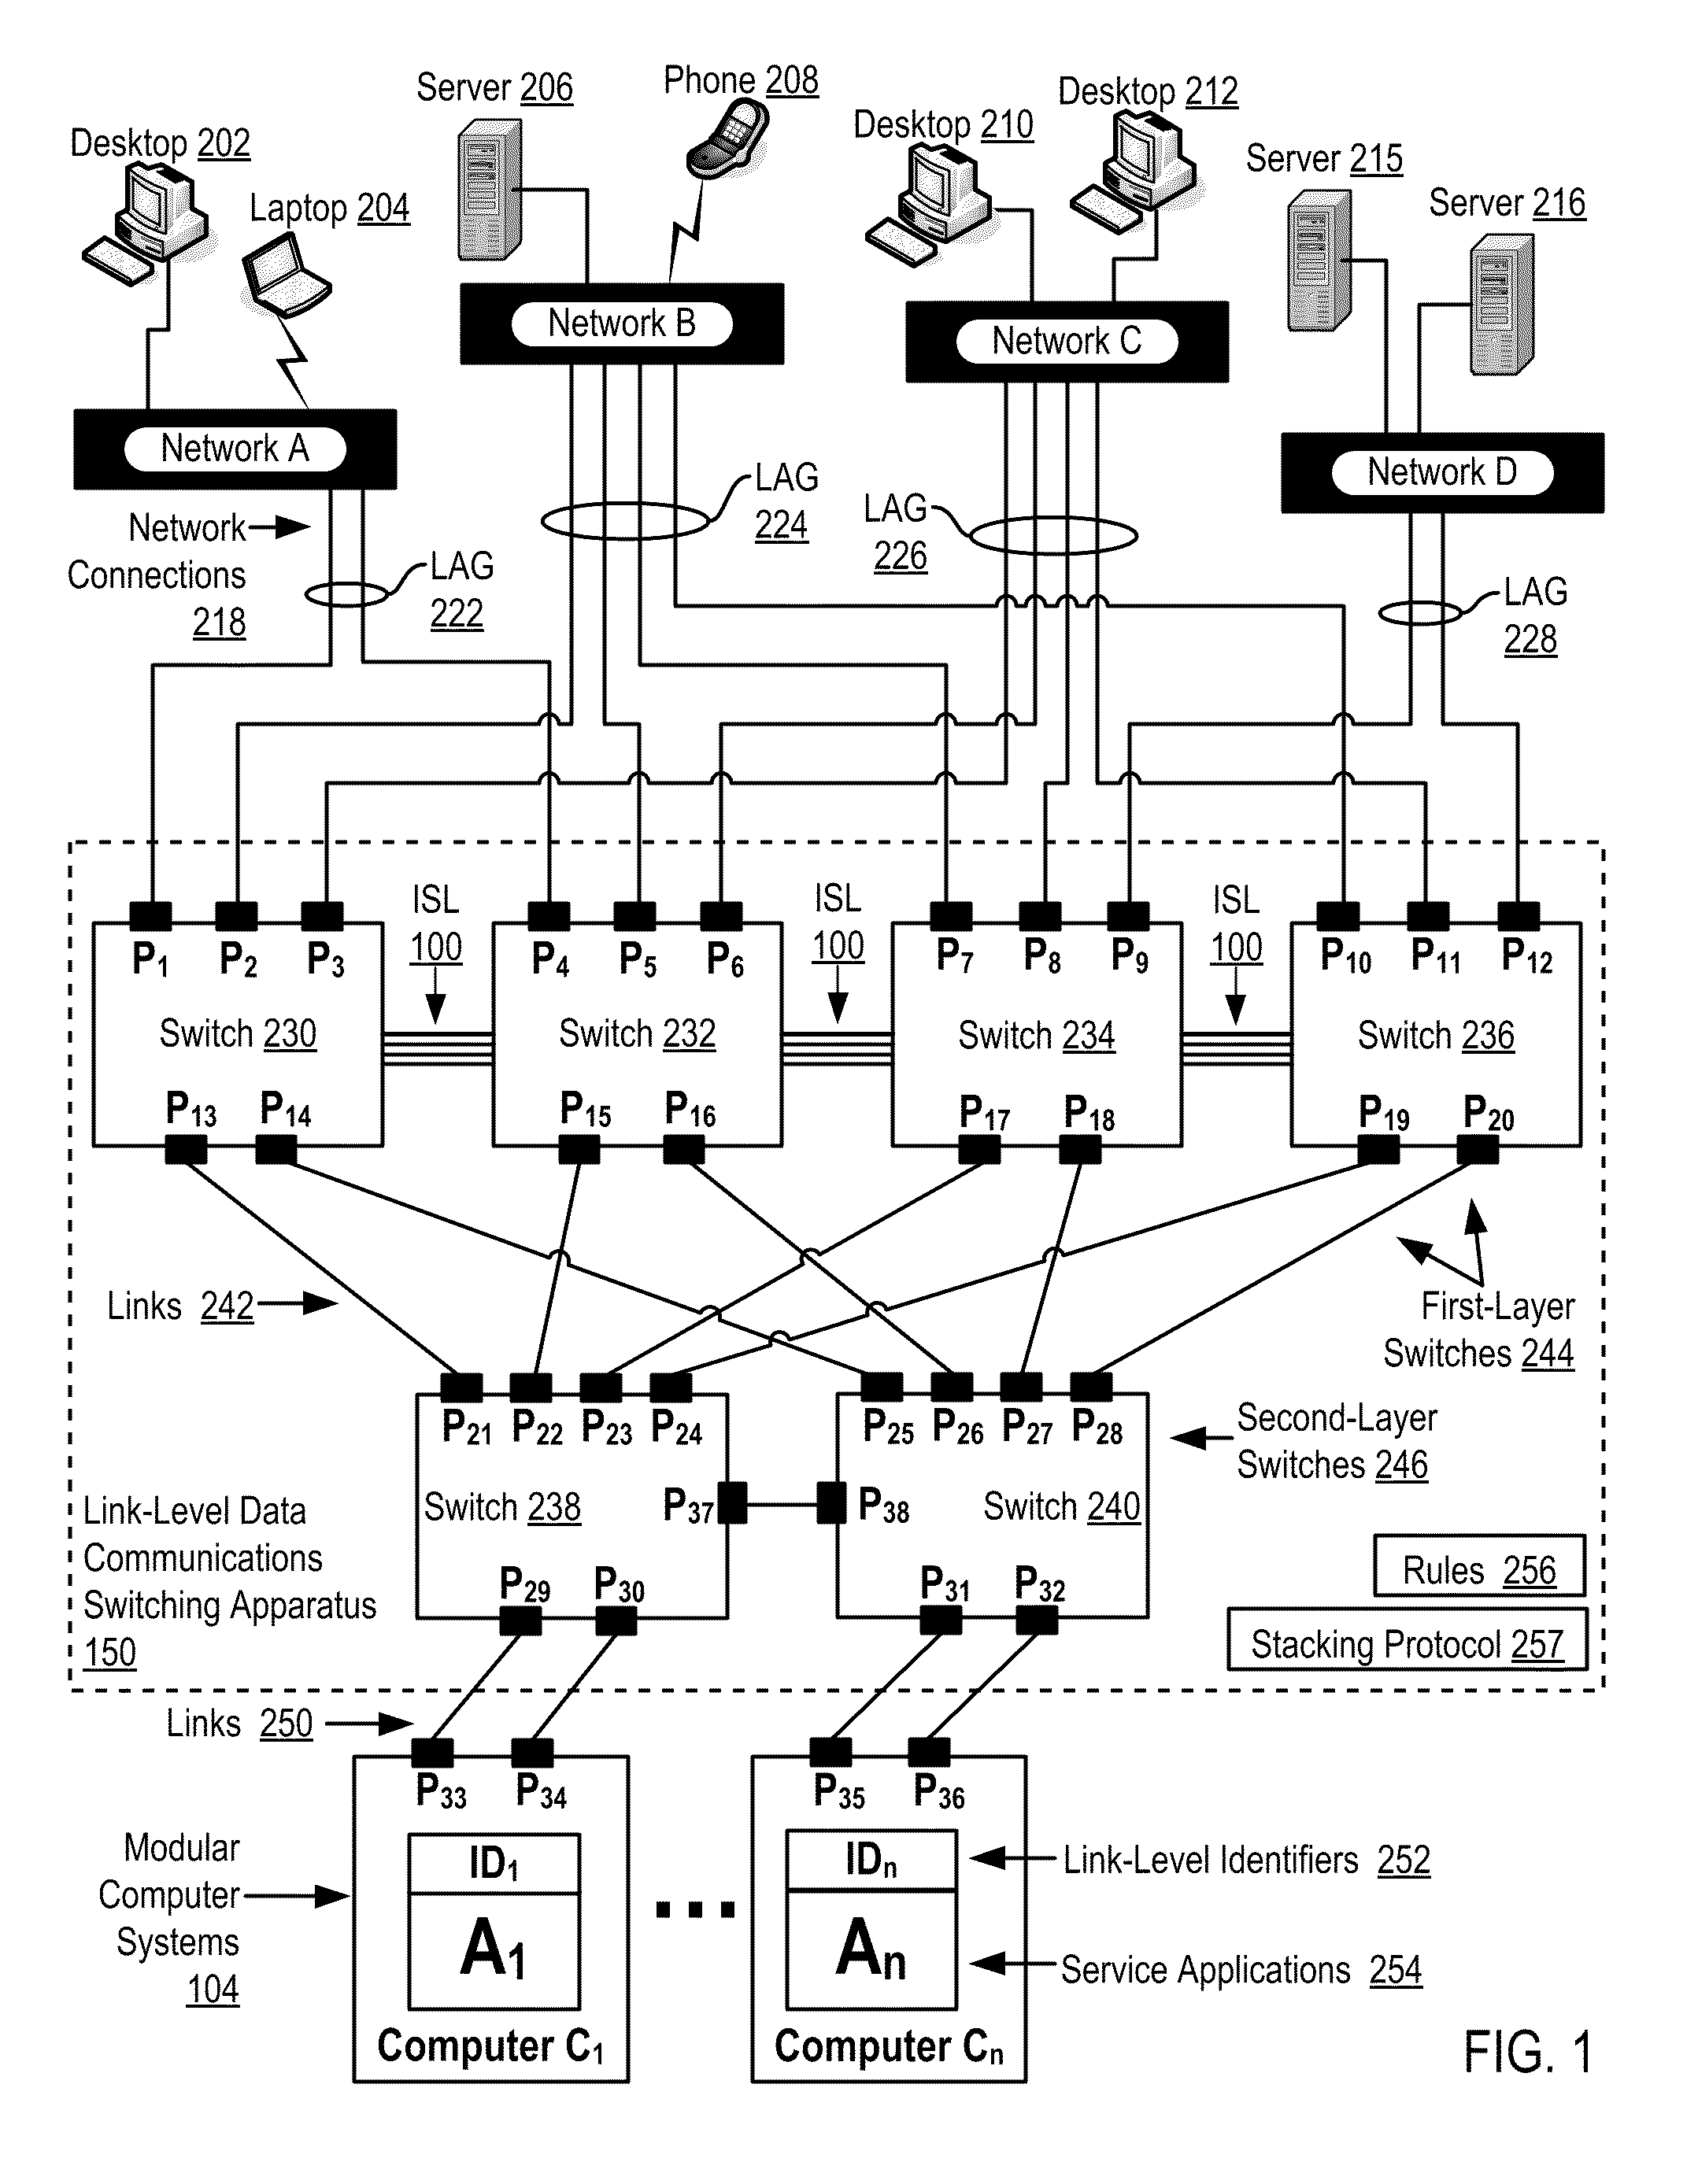 Two-Layer Switch Apparatus To Avoid First Layer Inter-Switch Link Data Traffic In Steering Packets Through Bump-In-The-Wire Service Applications